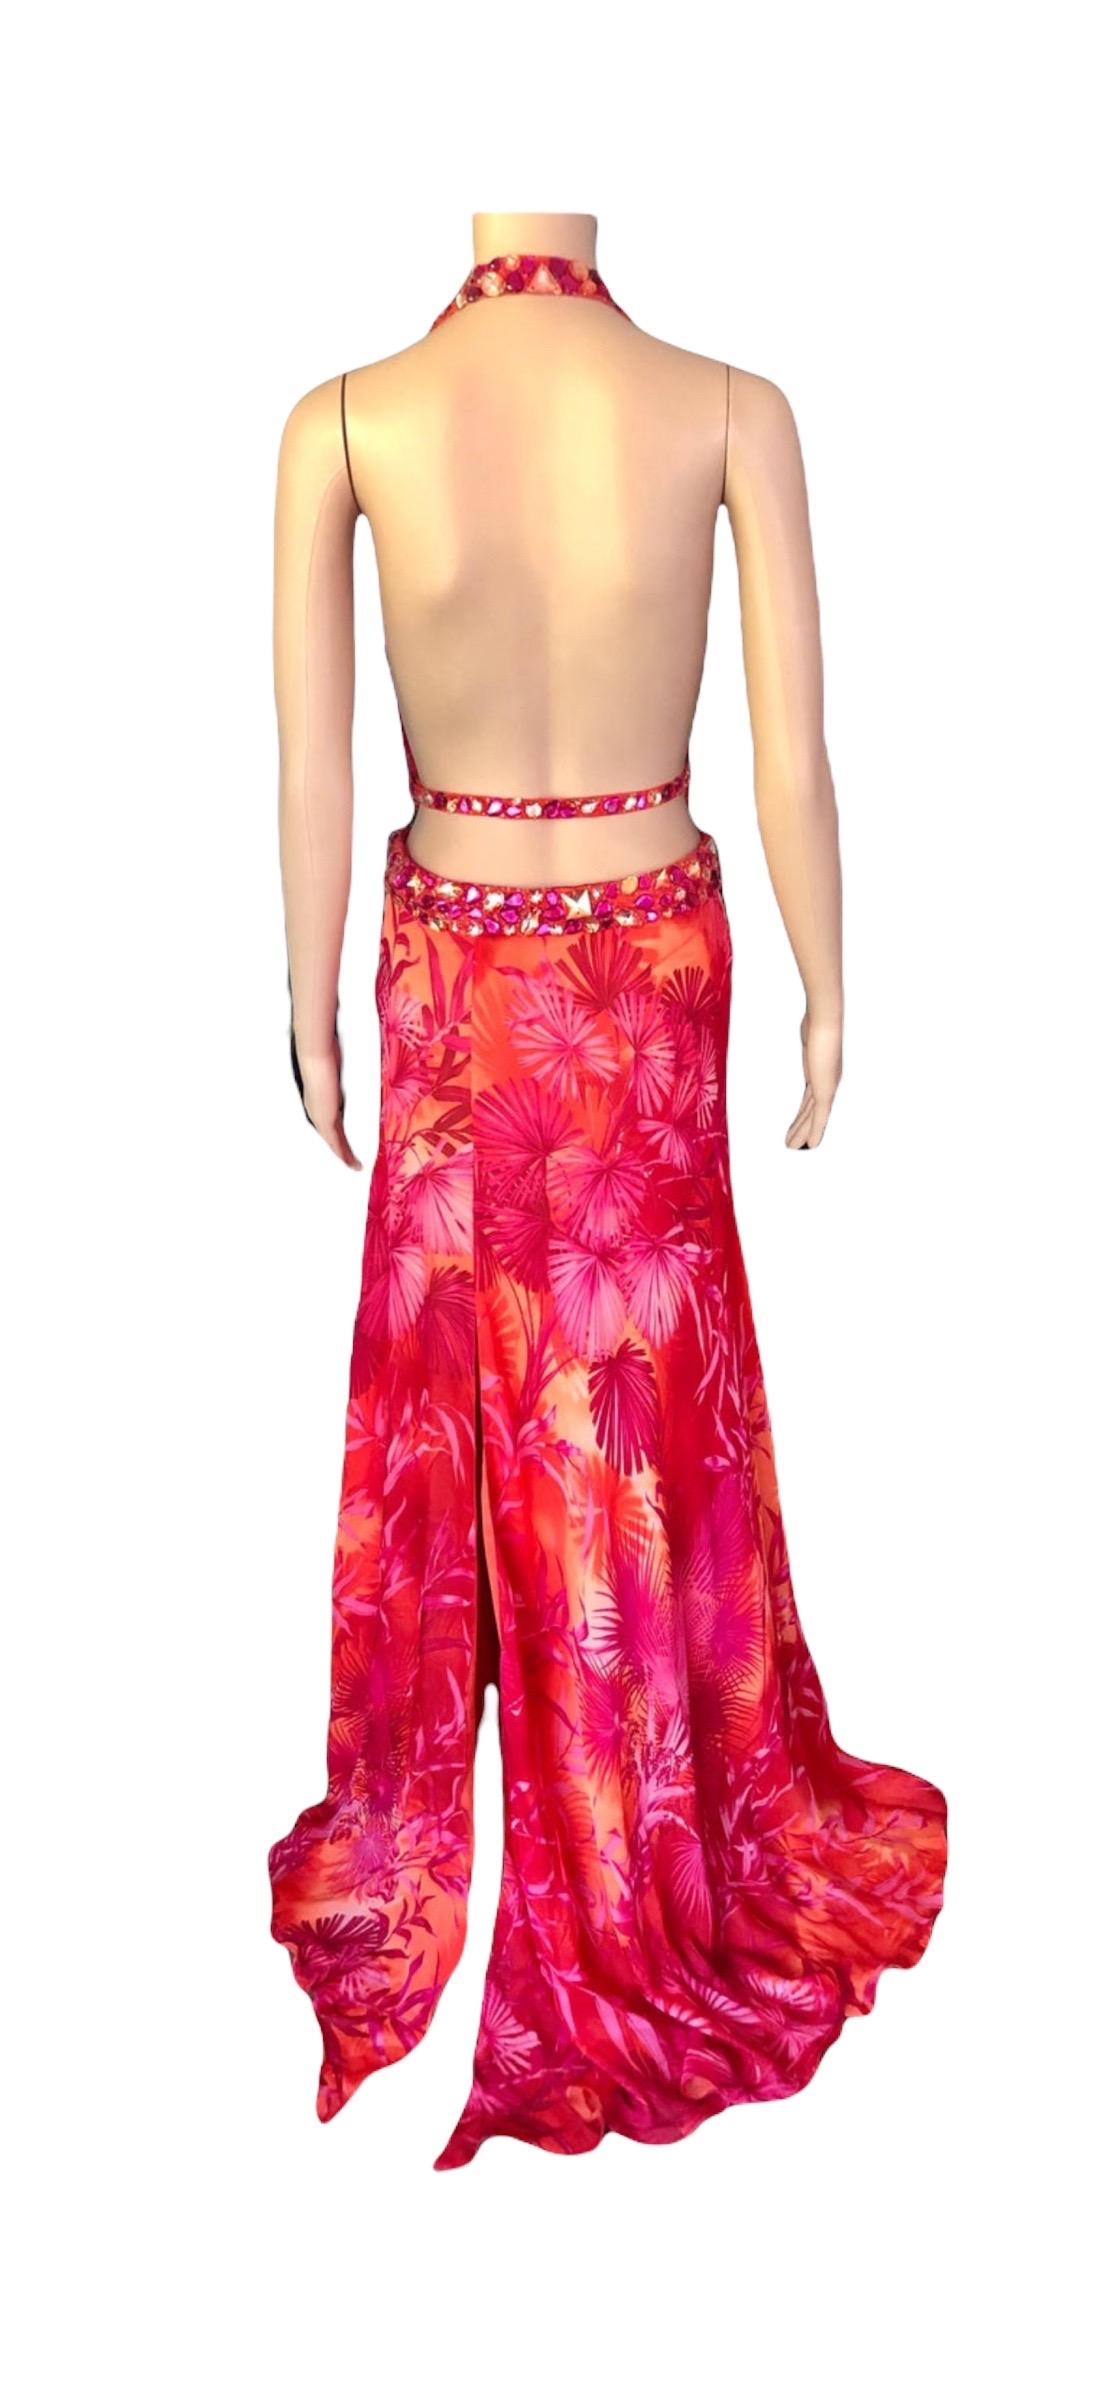 Gianni Versace S/S 2000 Runway Embellished Jungle Print Evening Dress Gown For Sale 6